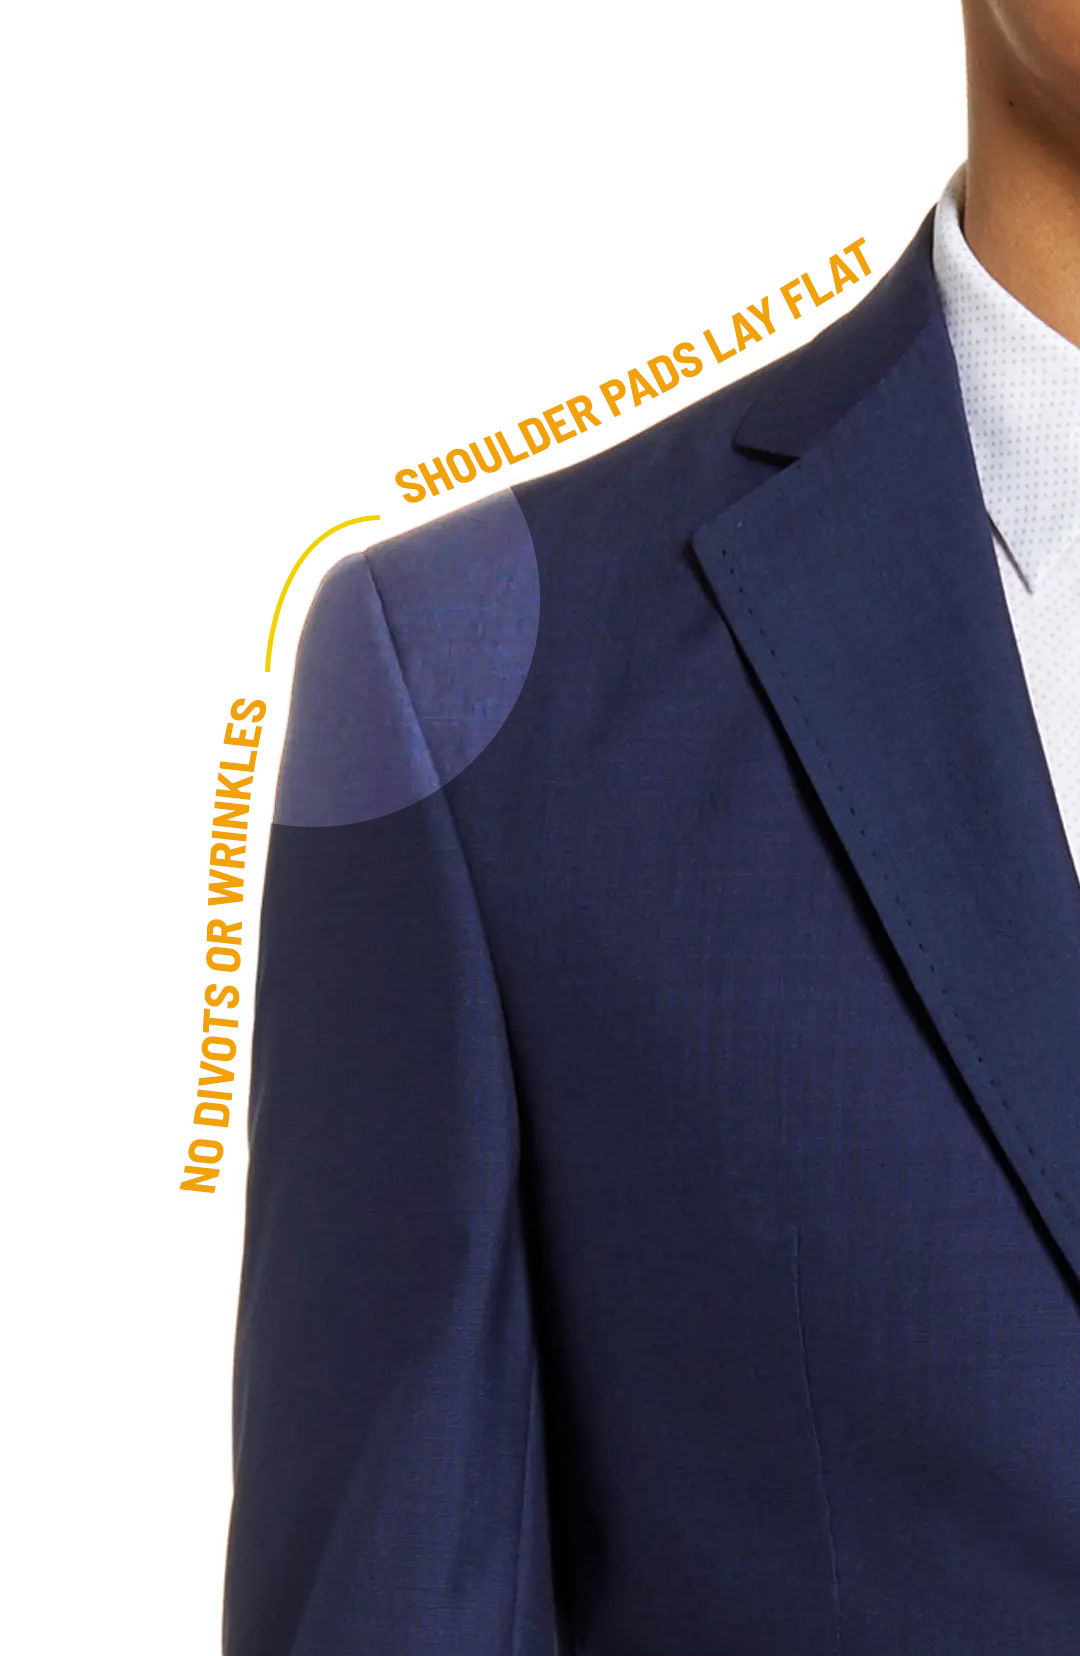 Flat suit jacket shoulders with no divots or wrinkles